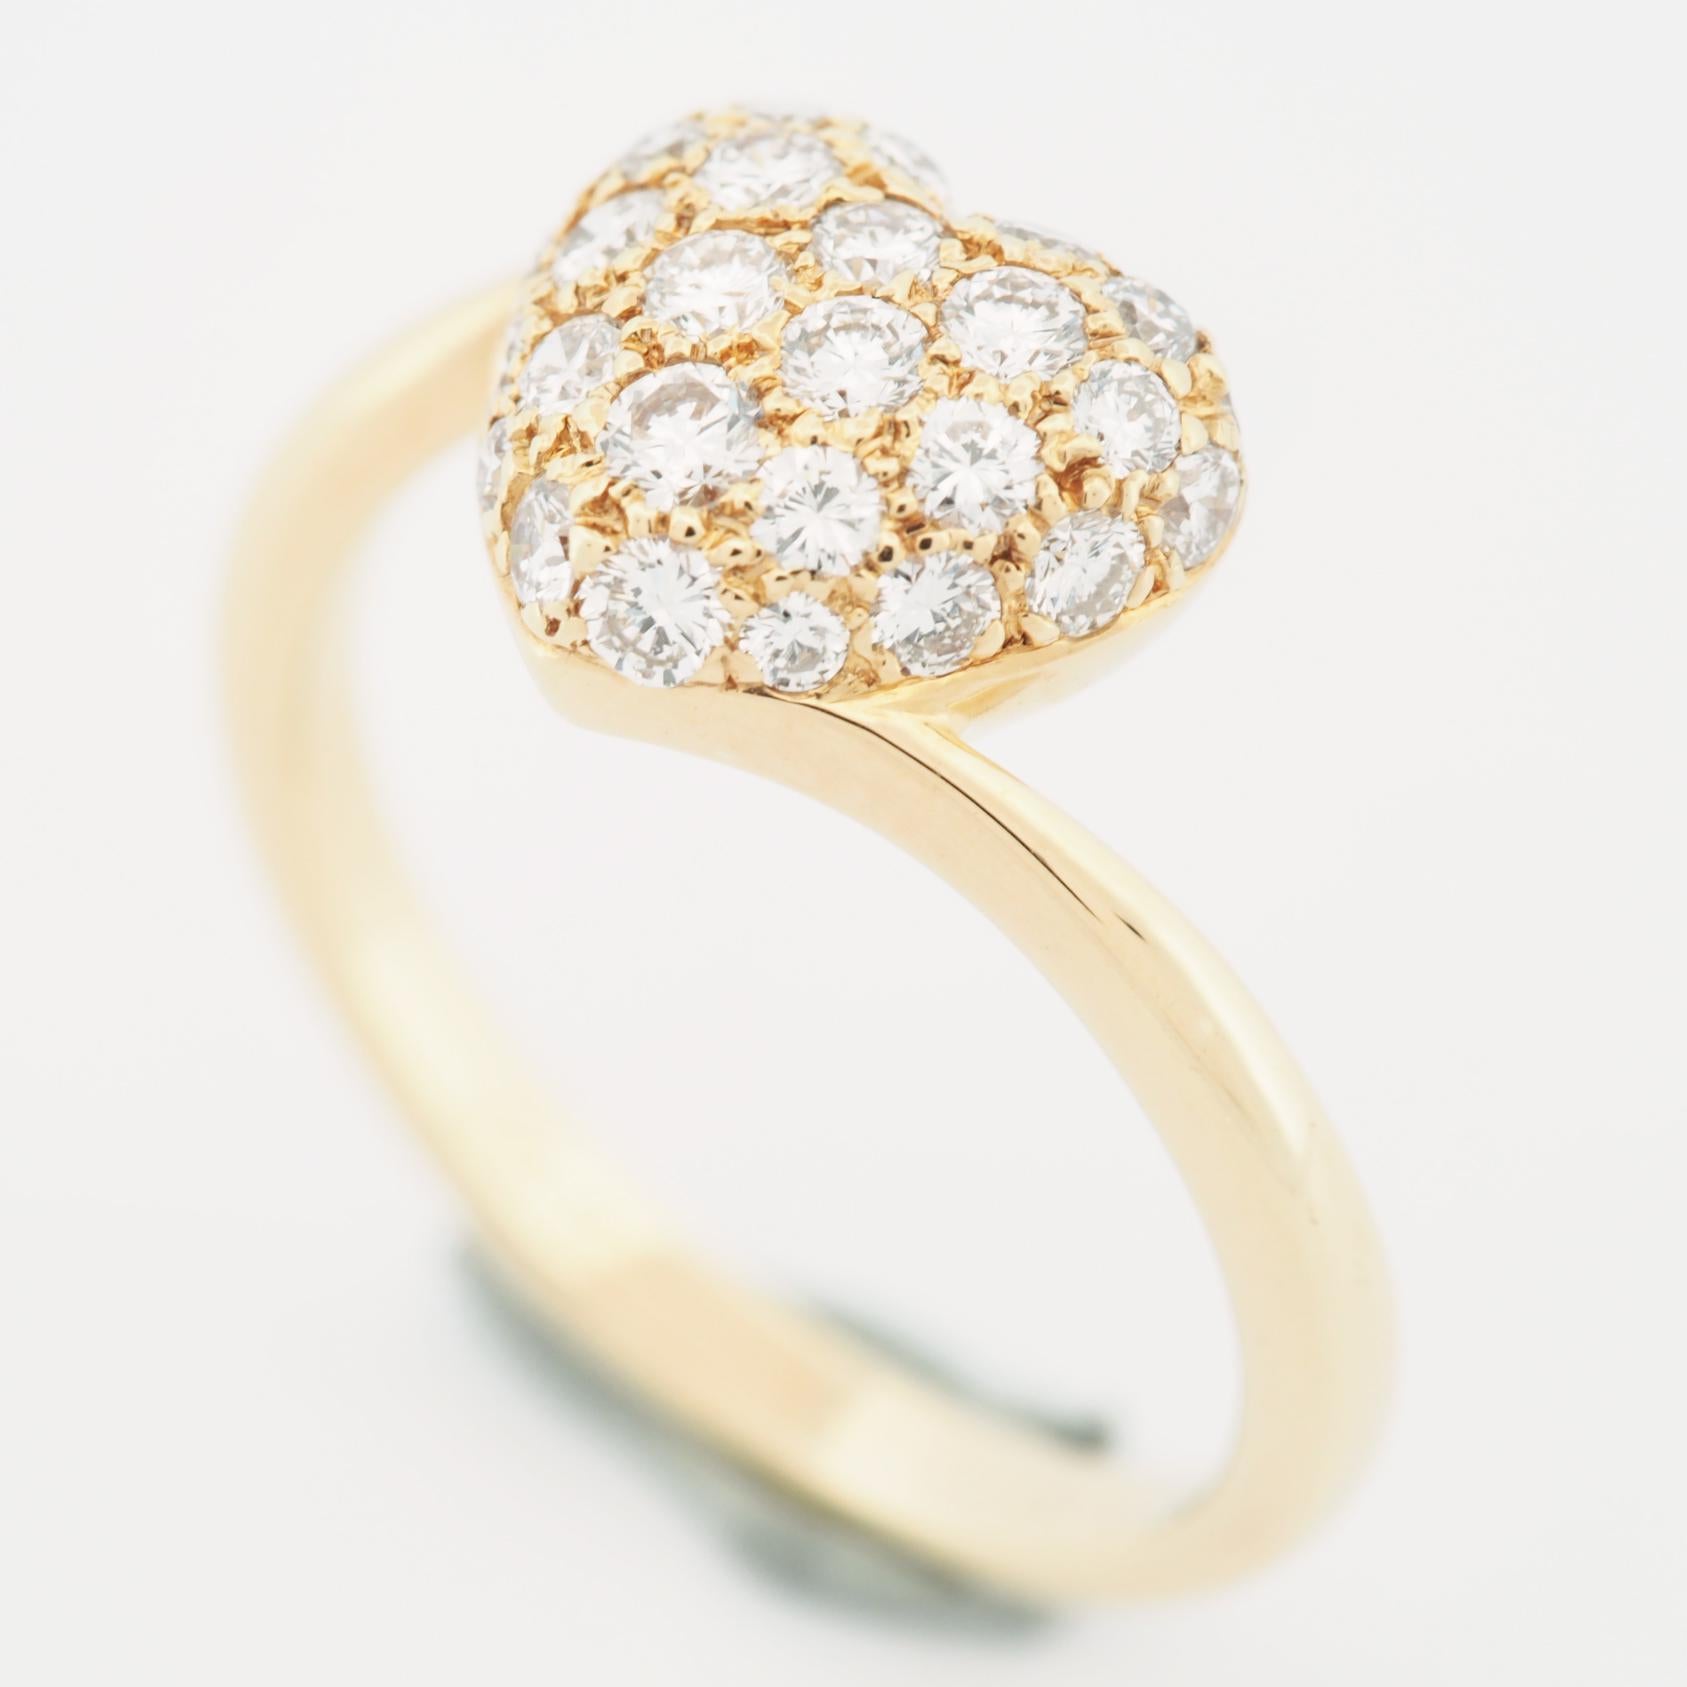 Item: Authentic Cartier Pave Diamonds Heart Ring
Stones: Diamond ( approx. 0.75ct )
Metal: 18K Yellow Gold
Ring Size: 51 US SIZE 5.5 UK SIZE K 1/4
Internal Diameter: 16.20 mm
Measurements: 2.0 - 8.2 mm width
Weight: 3.2 Grams
Condition: Used